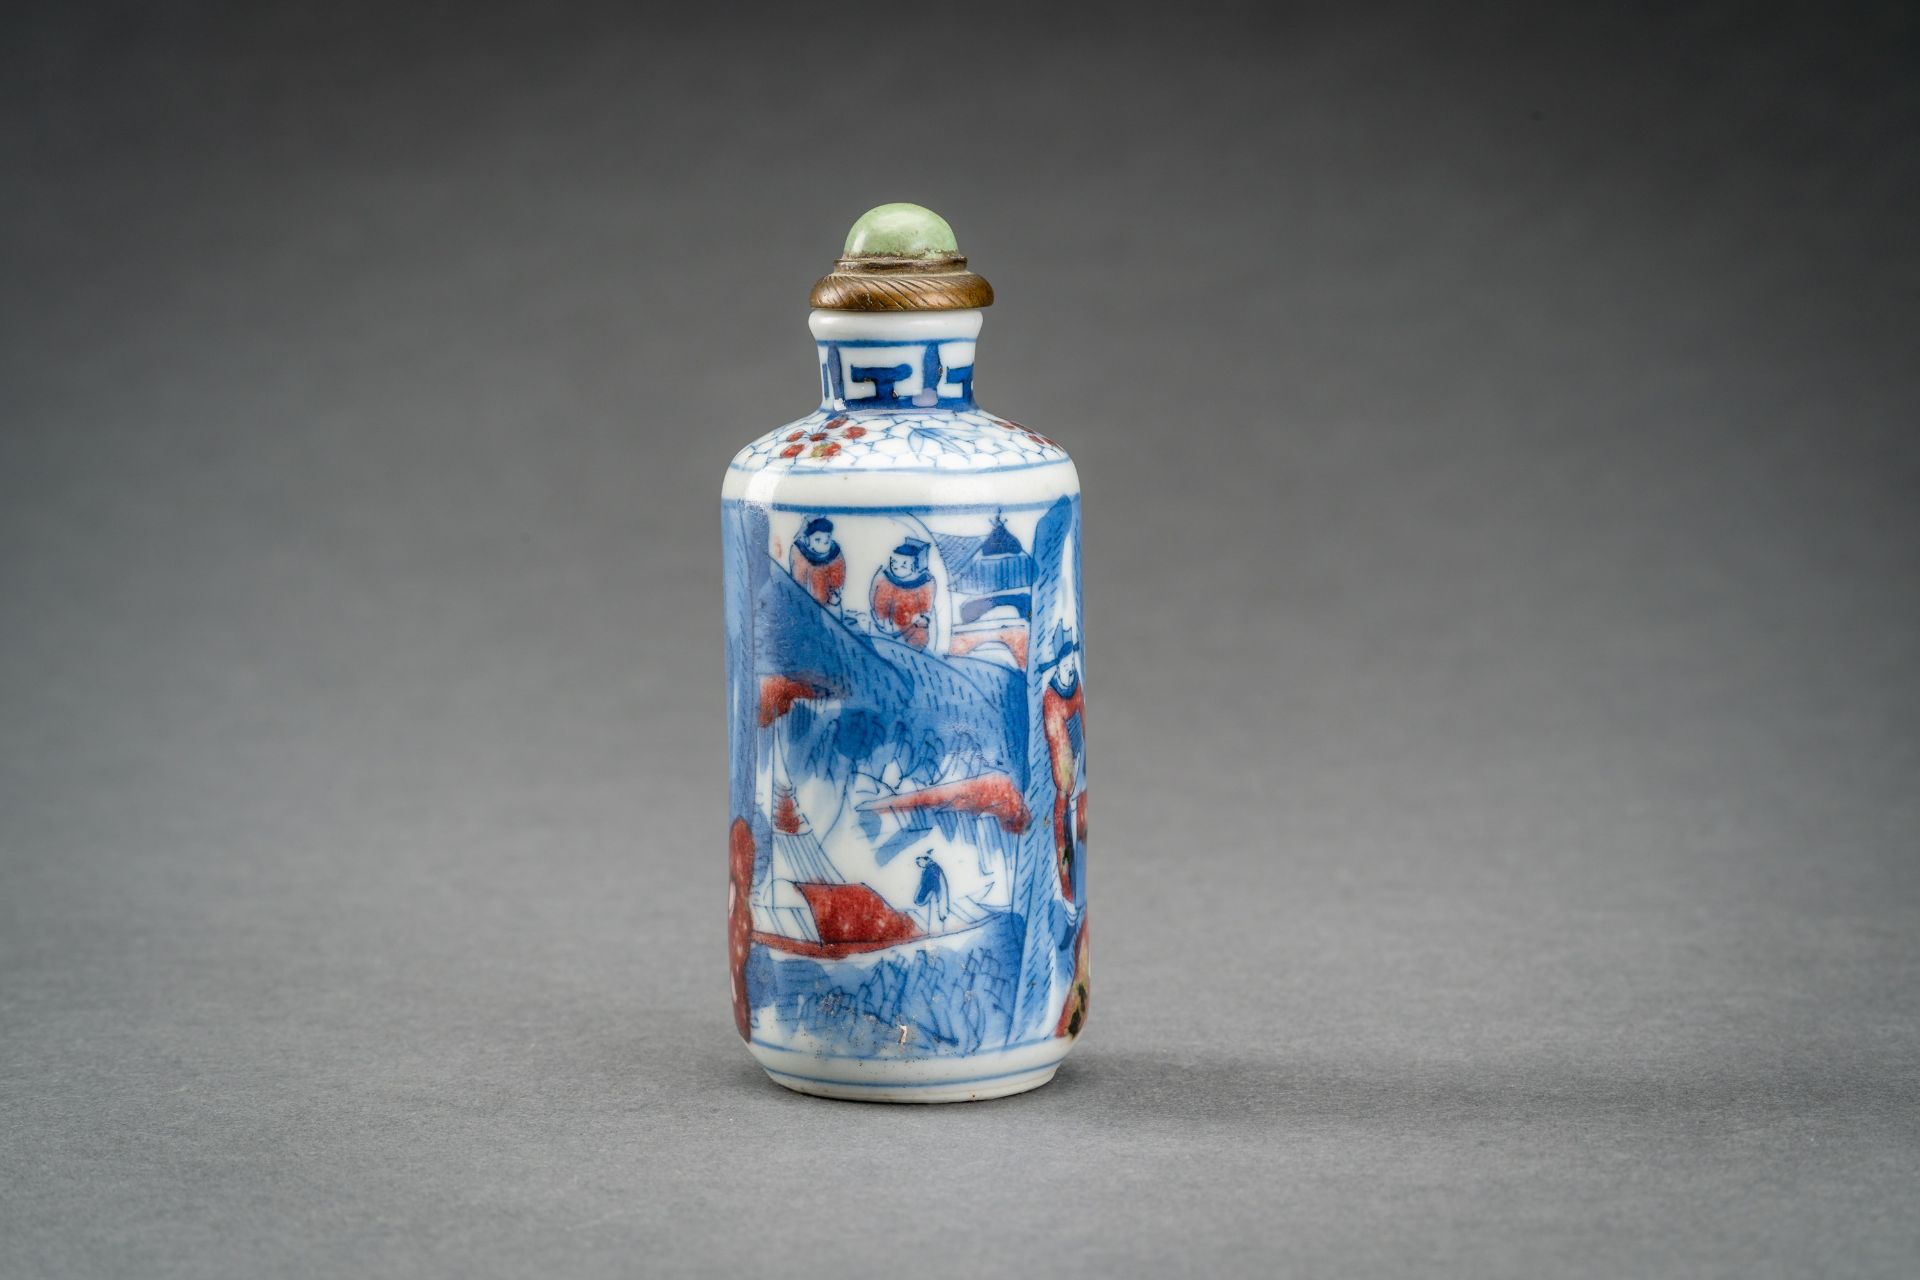 A BLUE, WHITE AND IRON RED PORCELAIN SNUFF BOTTLE WITH PALACE SCENE, QING - Image 4 of 8